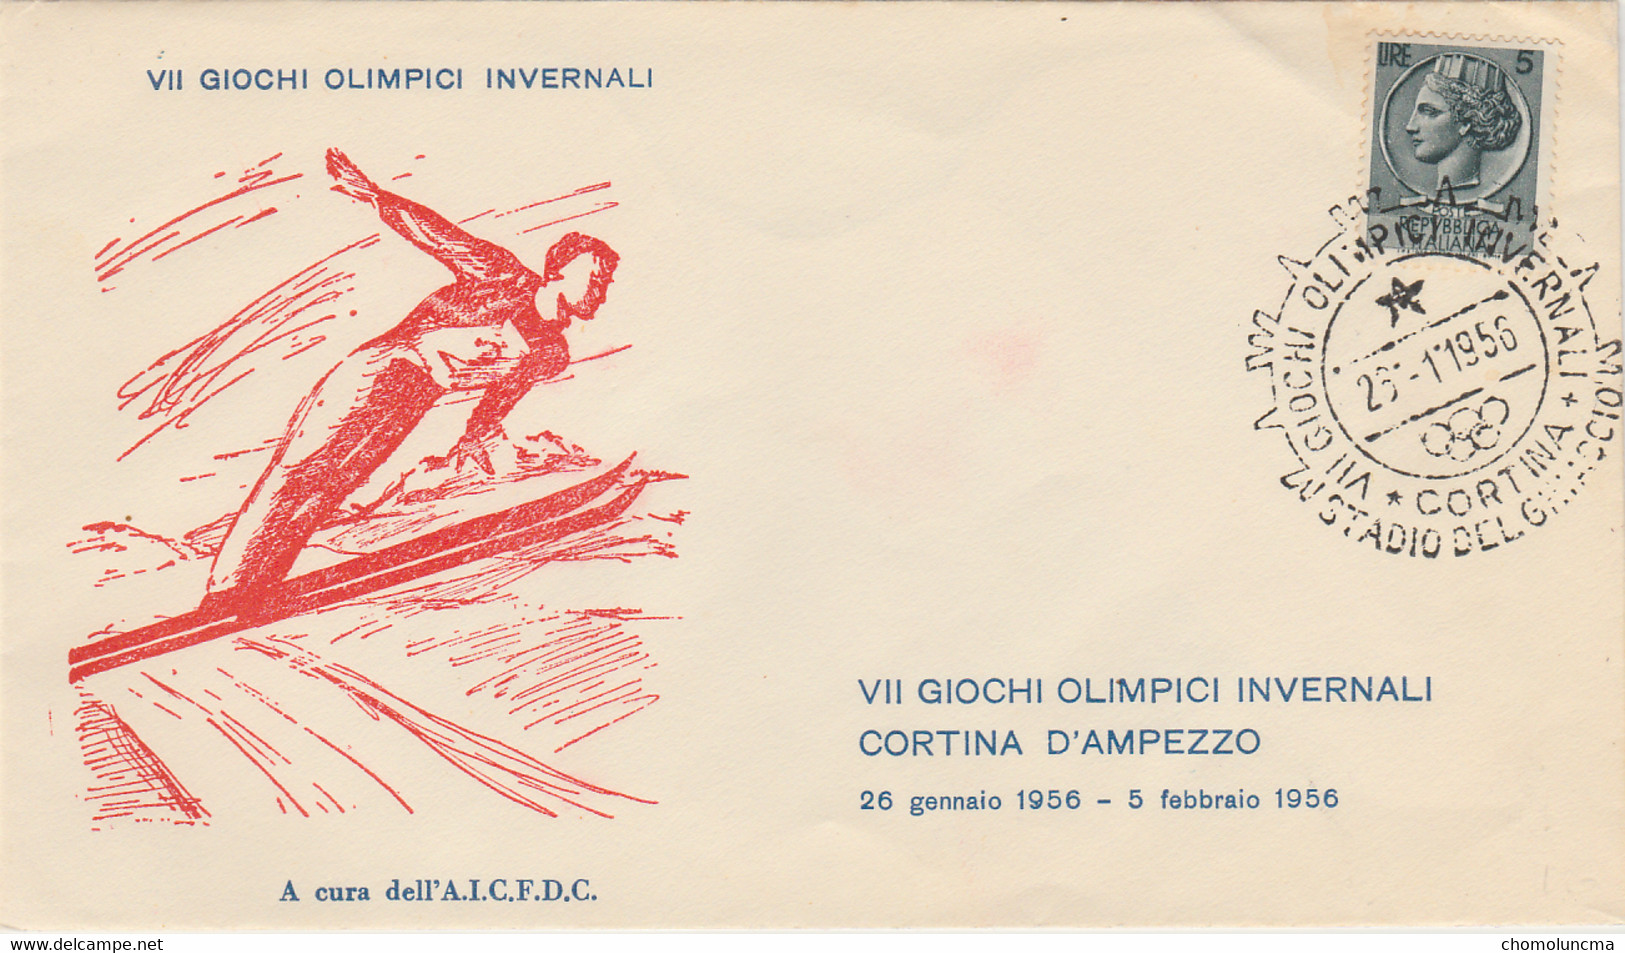 Cortina D'Ampezzo1956 Jeux Olympiues D'hiver  Winter Olympic Games Olympics Nordic Combined Combiné Nordique - Inverno1956: Cortina D'Ampezzo